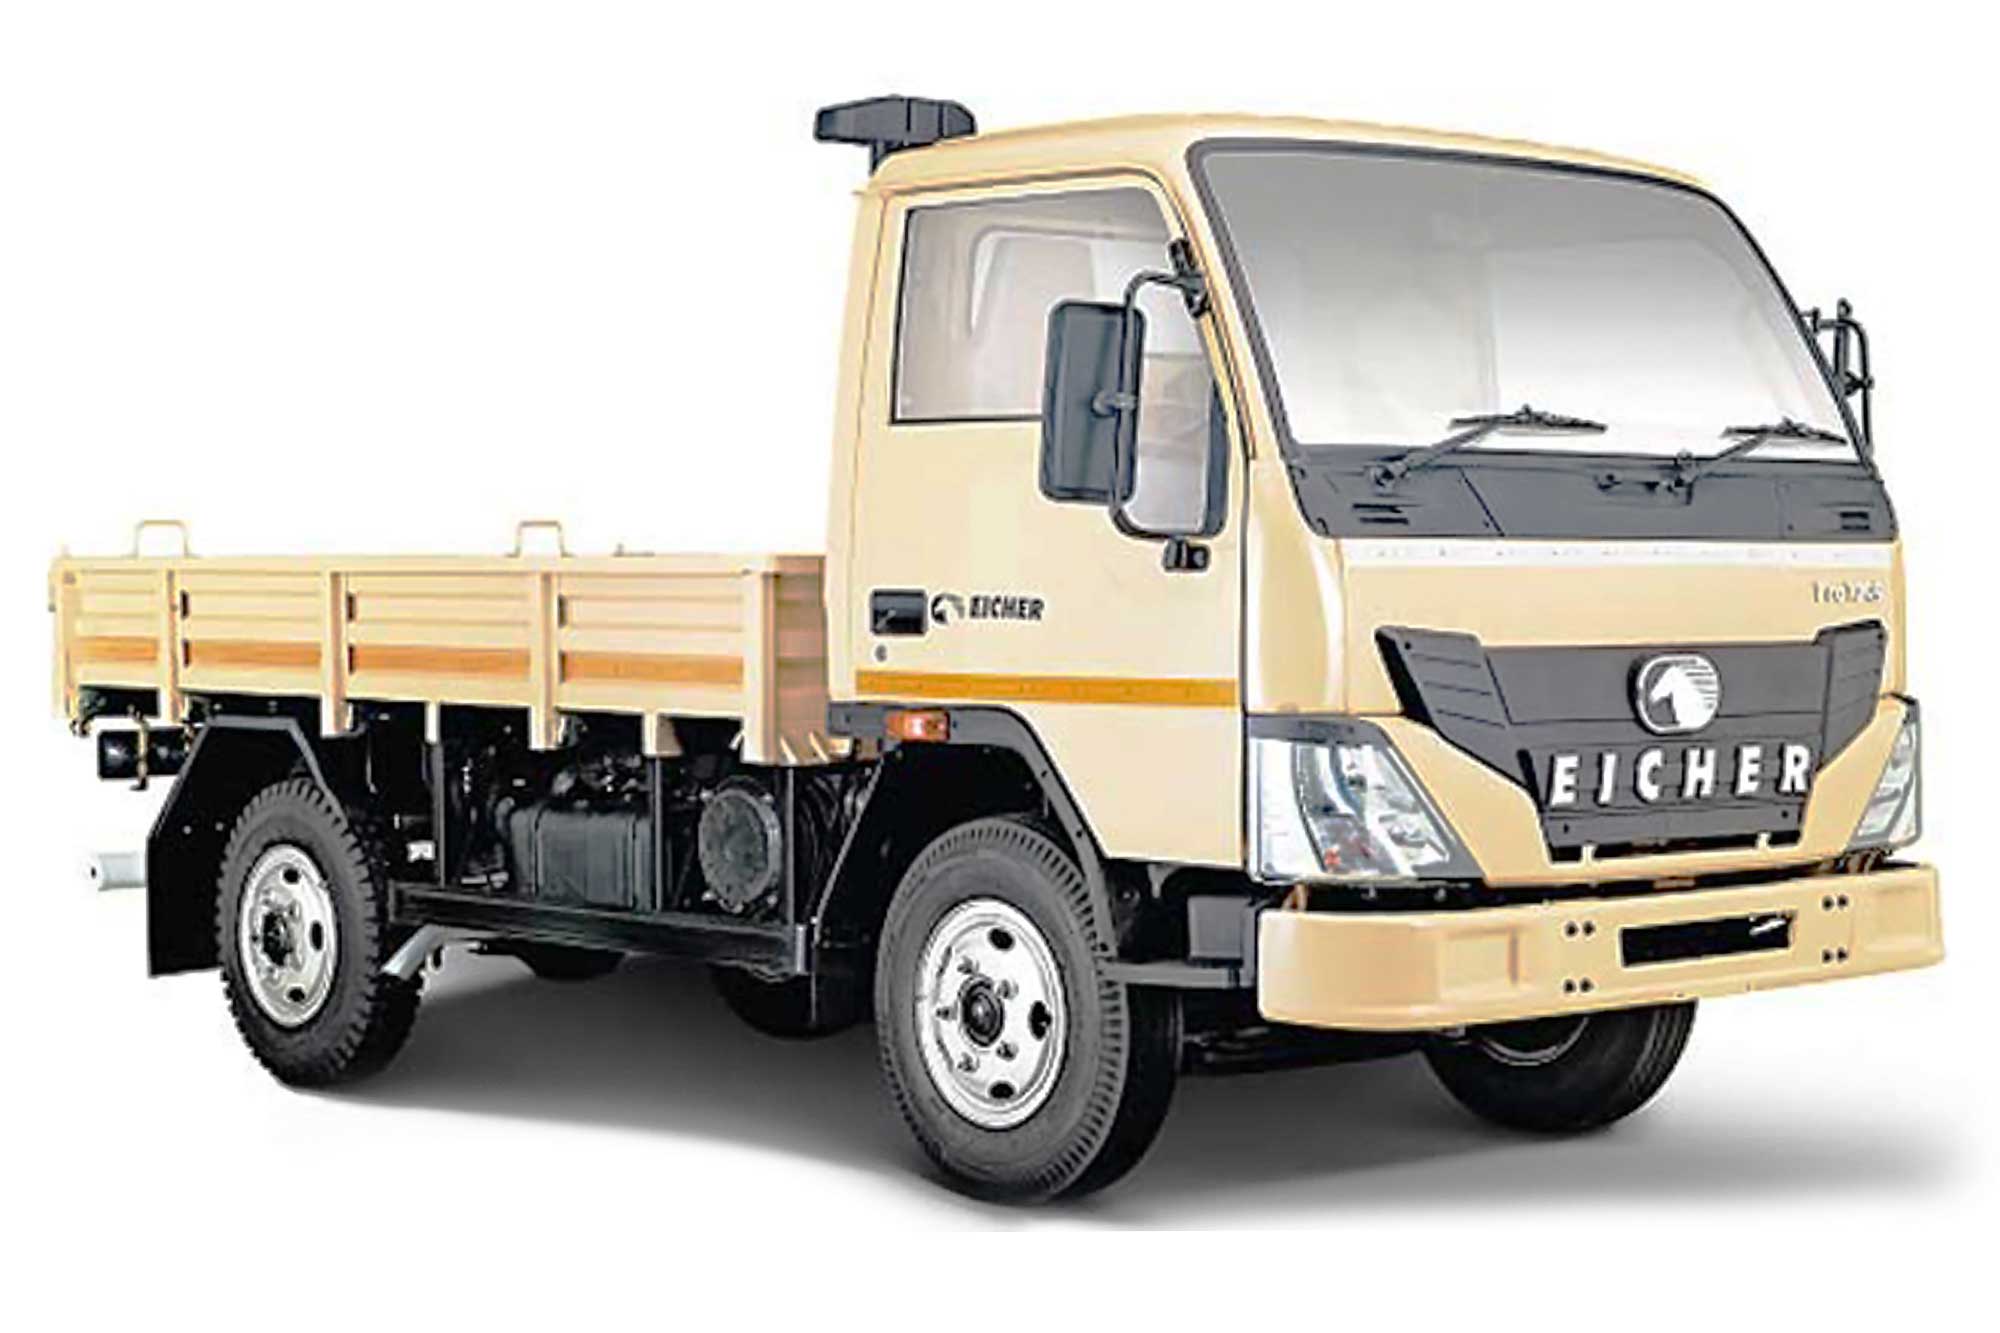  Eicher  Trucks Buses forays into the sub 5T category 